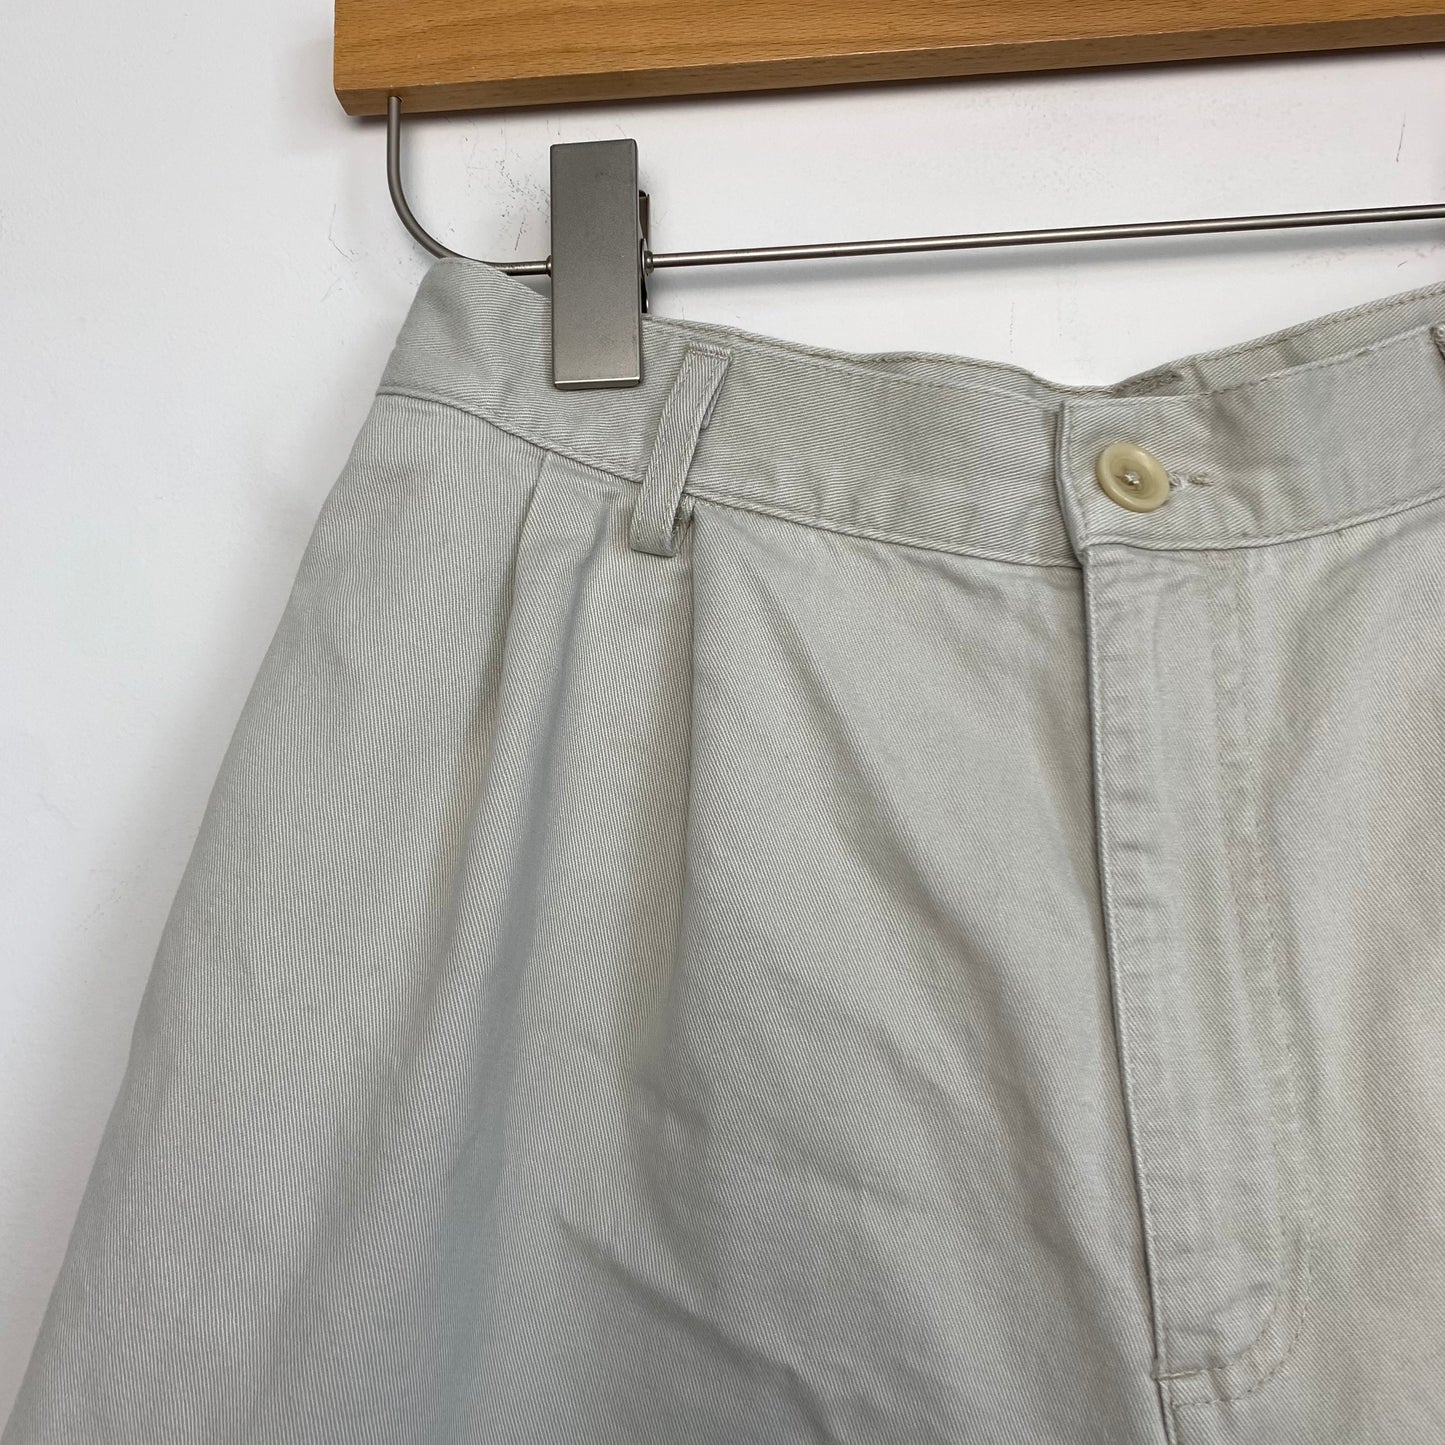 90s High Rise Khaki Trouser Shorts with Pleated Front Cotton 26”